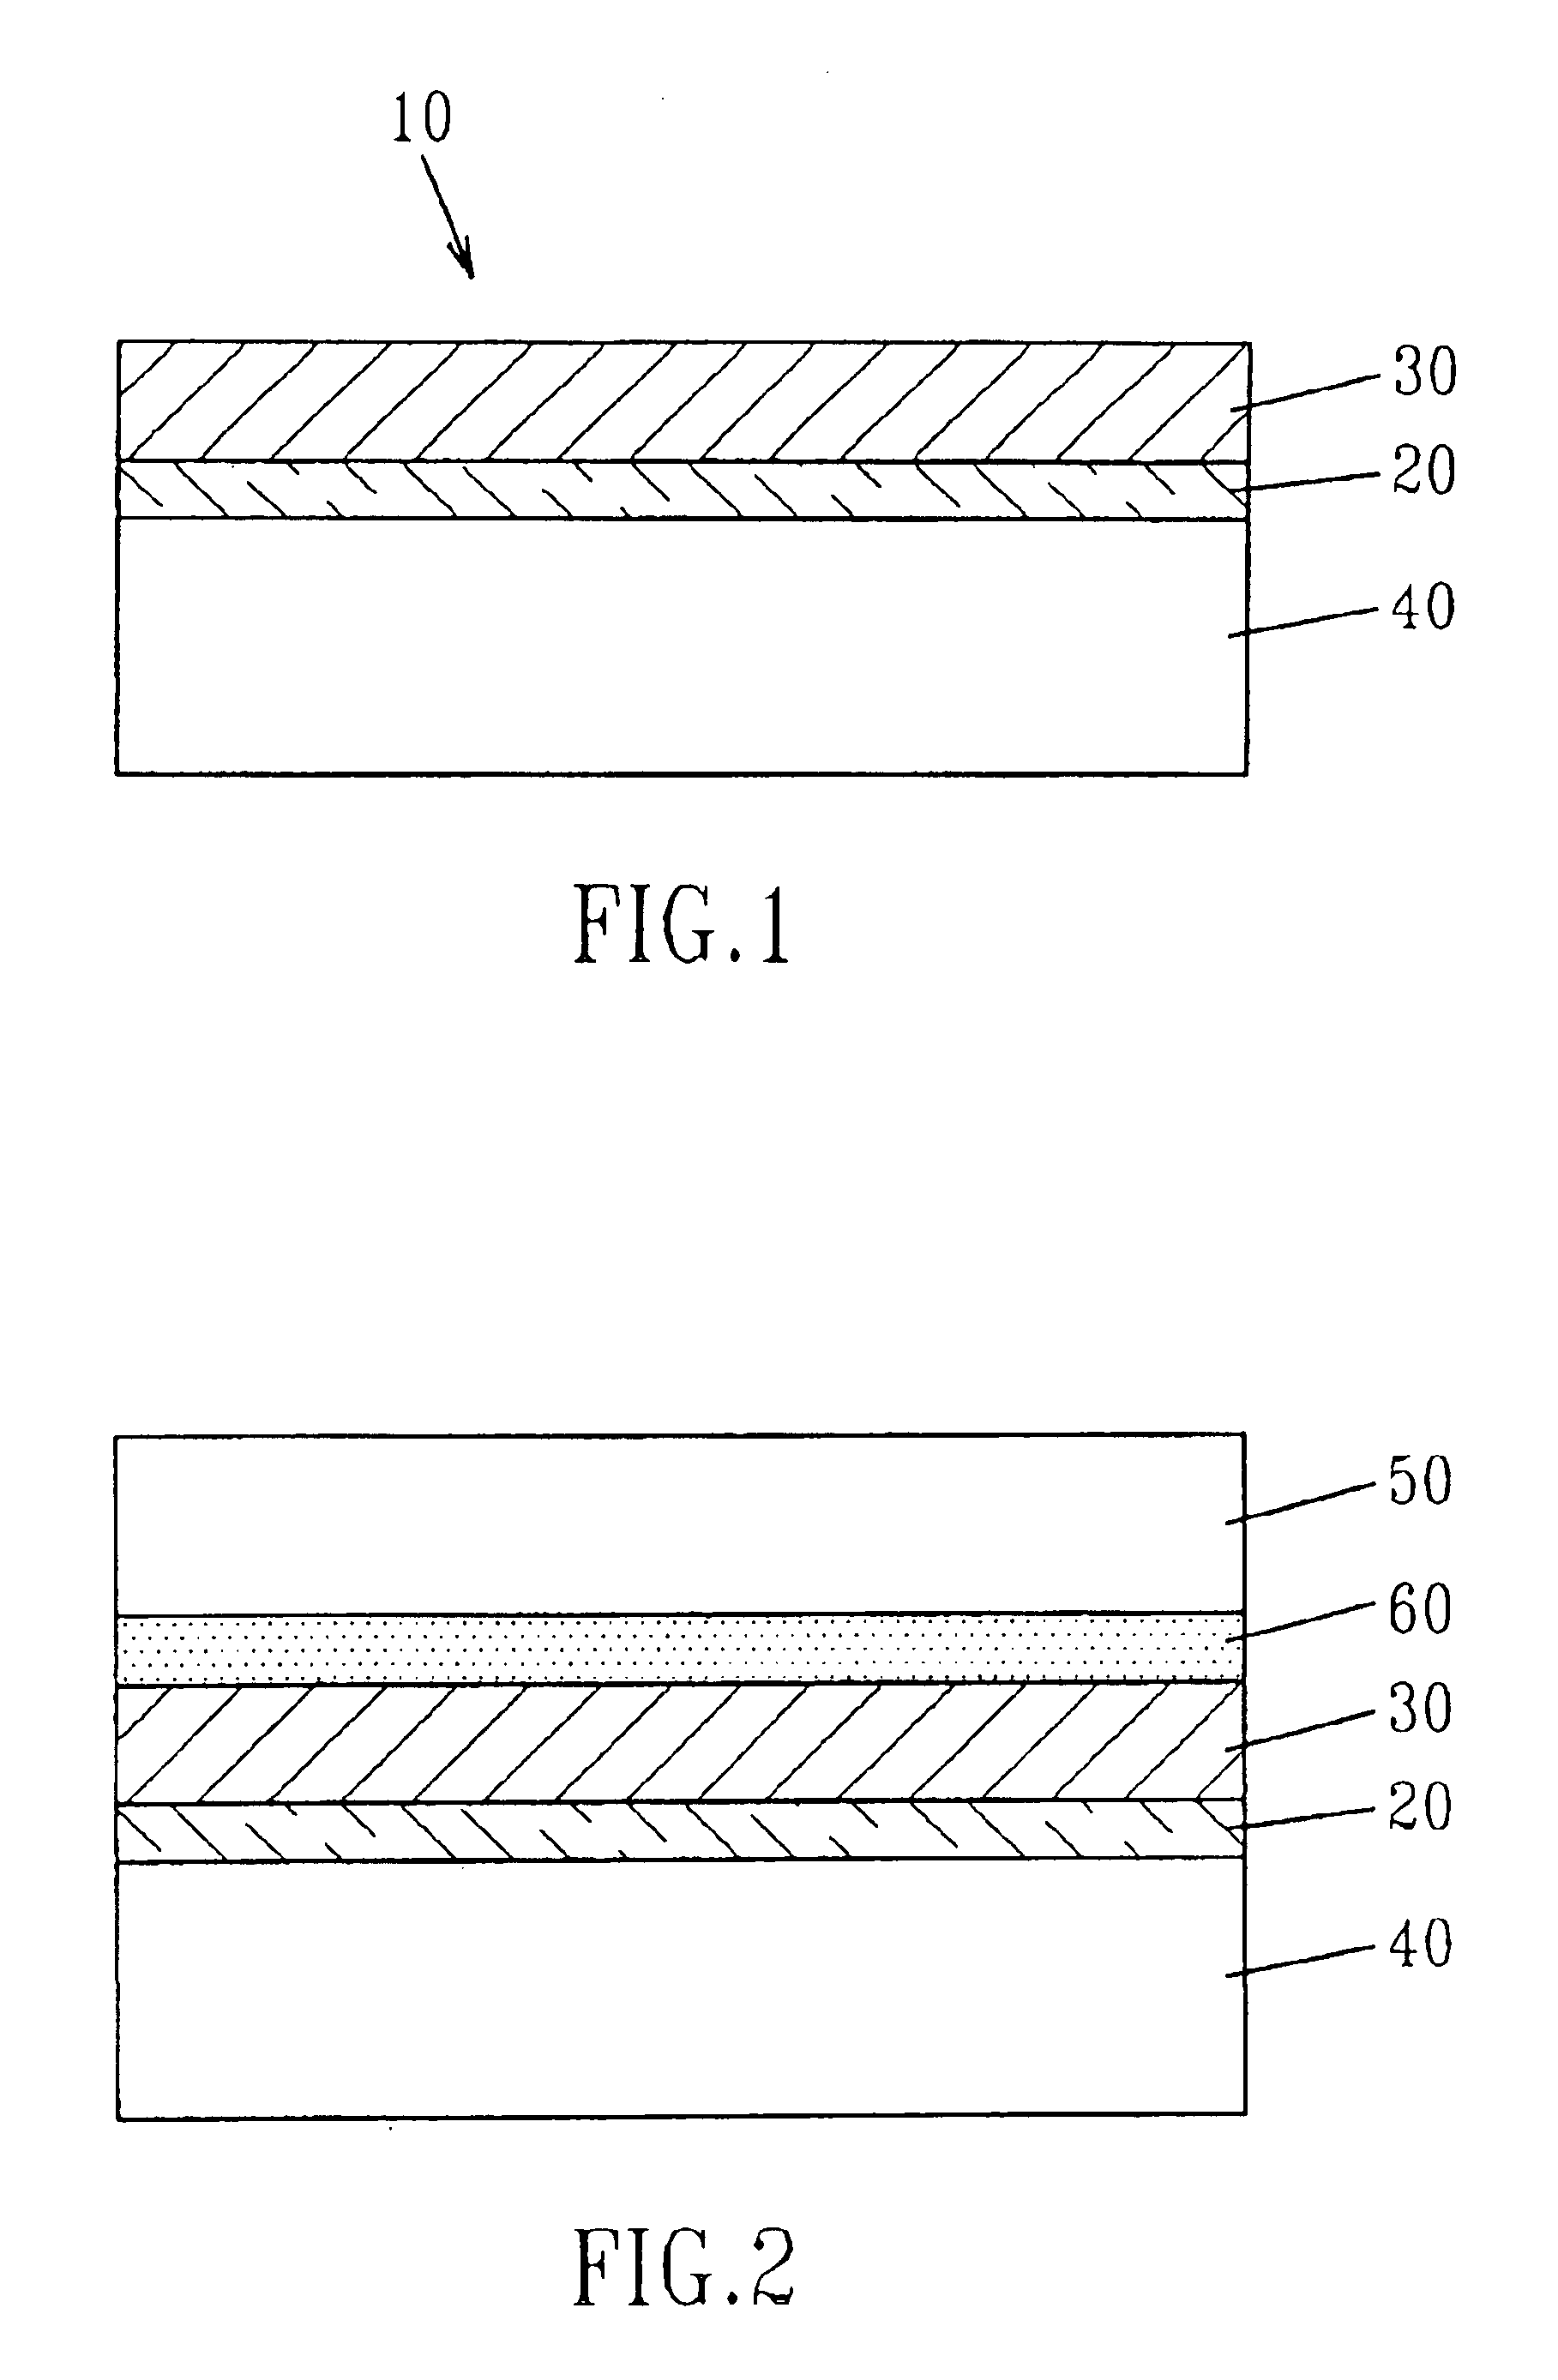 Method of fabricating silicon devices on sapphire with wafer bonding at low temperature